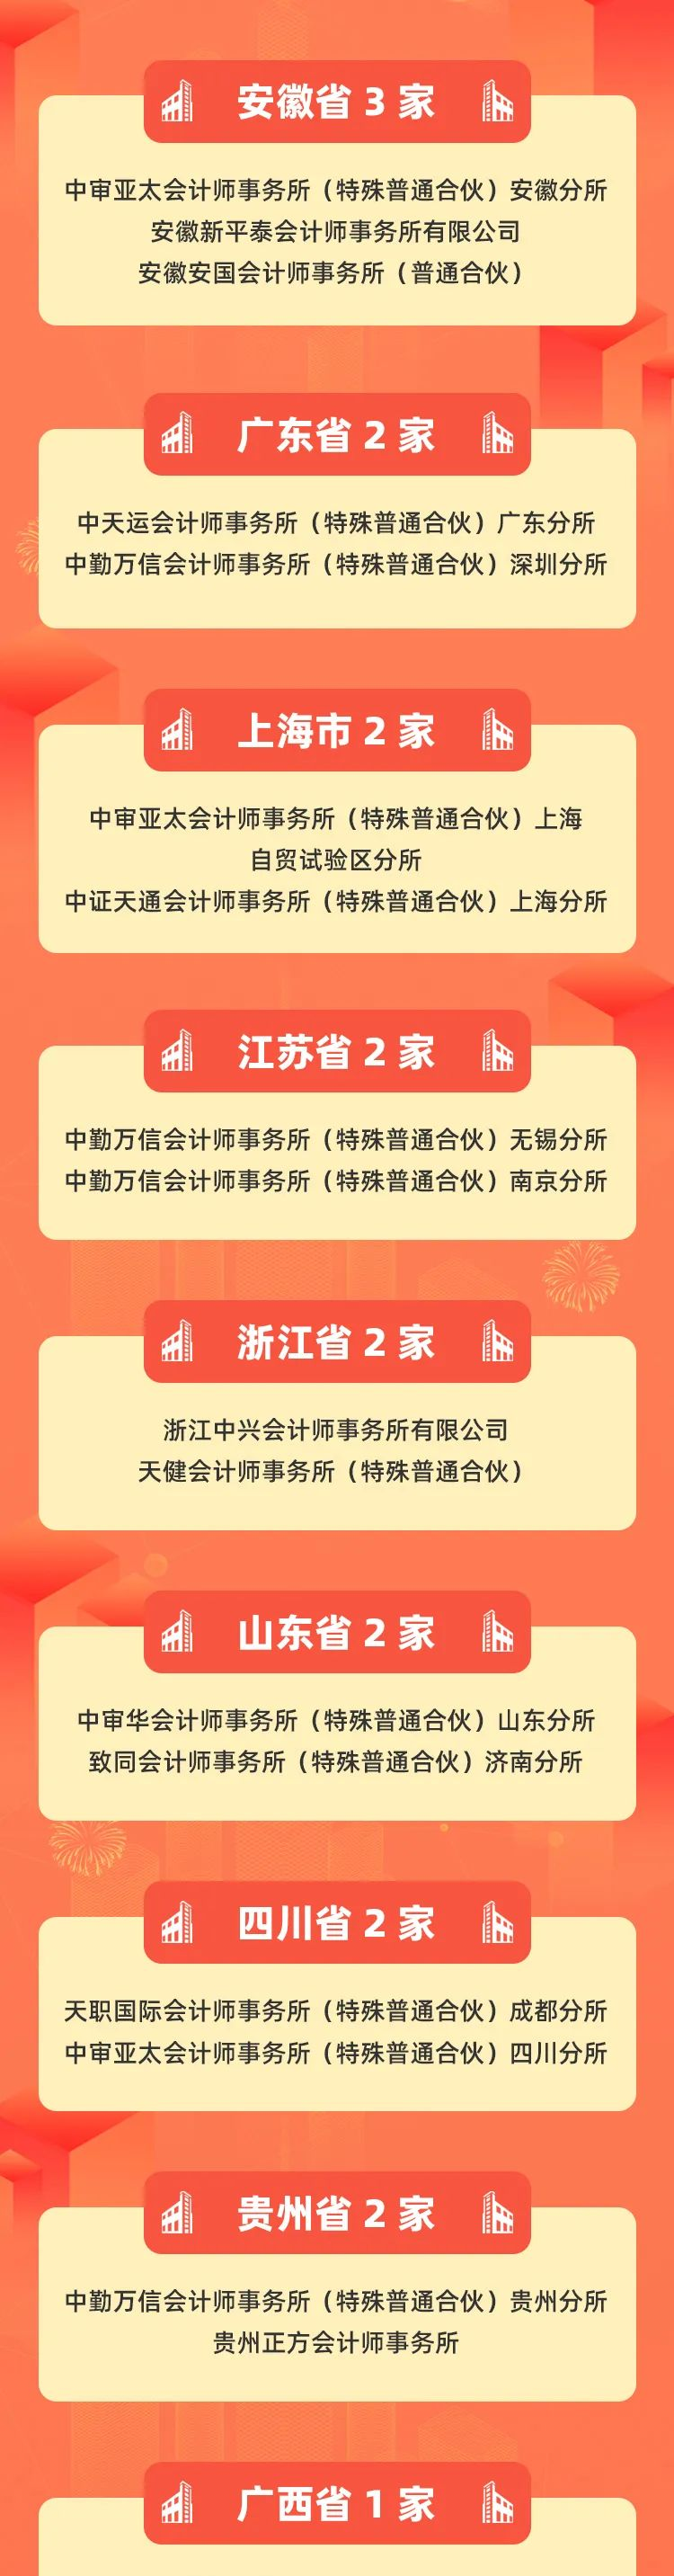 https://client-download-pre.obs.cn-north-4.myhuaweicloud.com/official/dev/841939168233132032.png